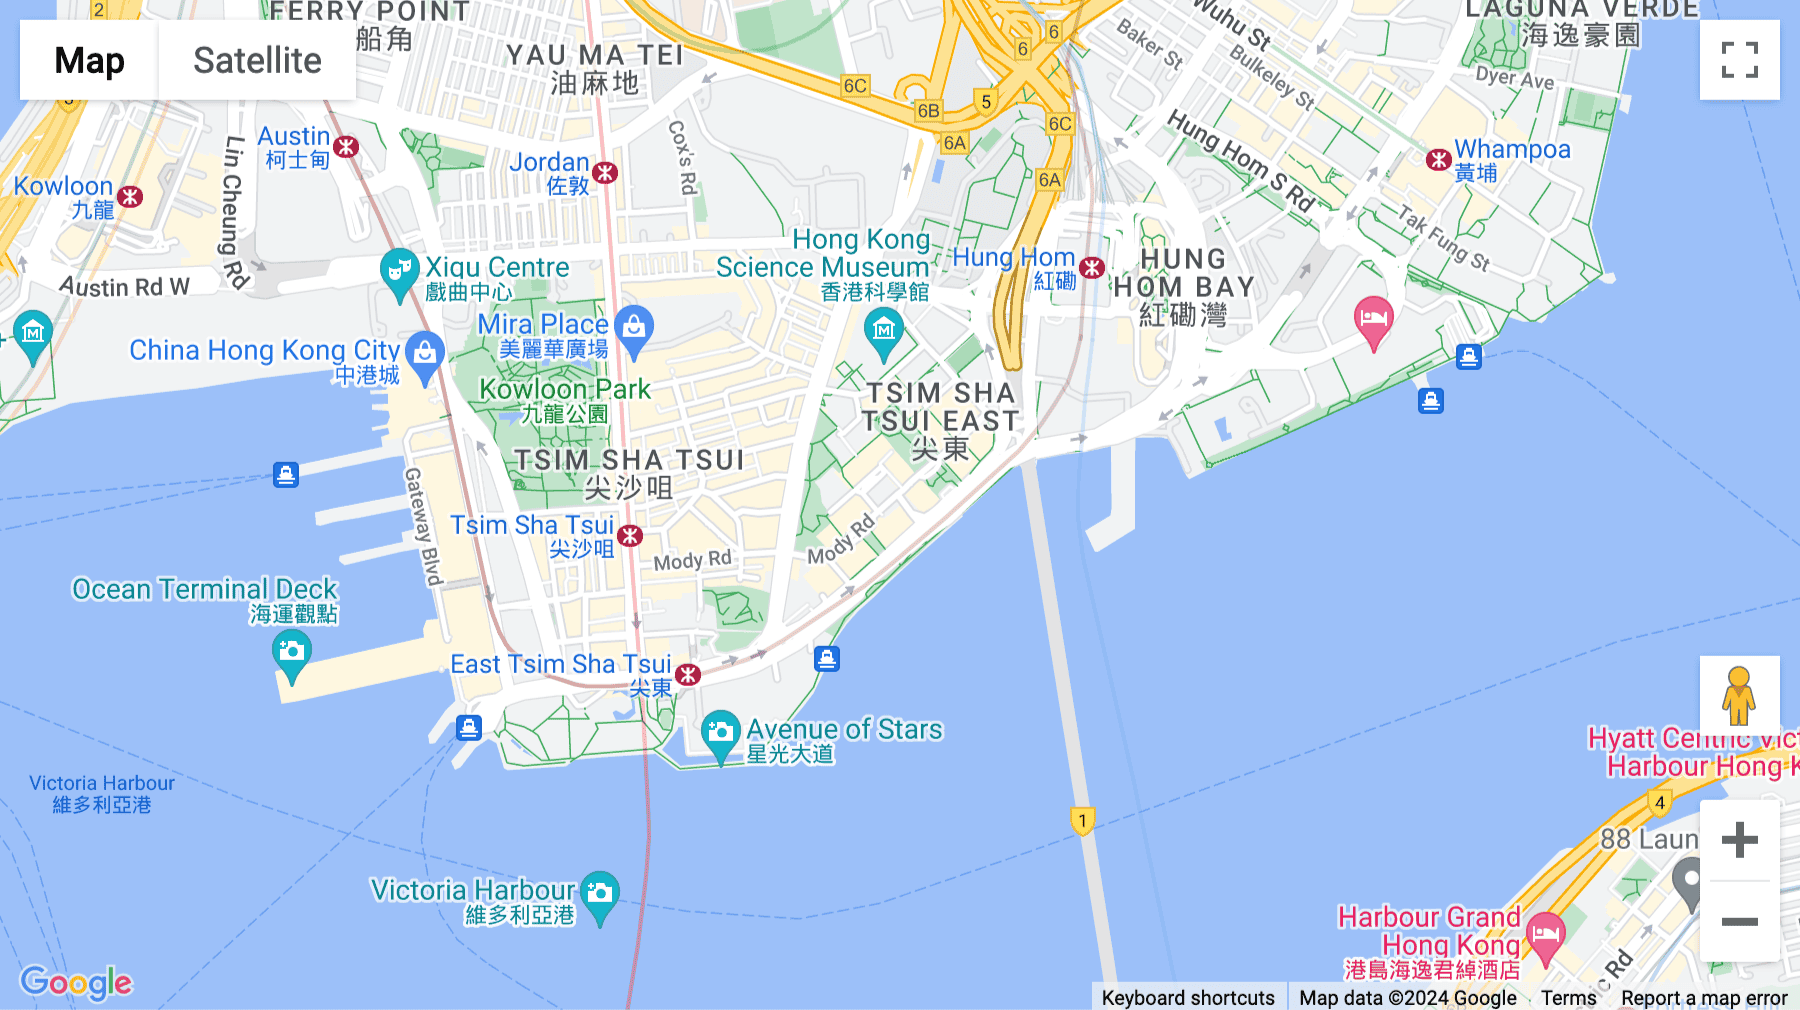 Click for interative map of Suite 811 East Wing, Tsimshatsui Centre, 66 Mody Road, Kowloon, Hong Kong